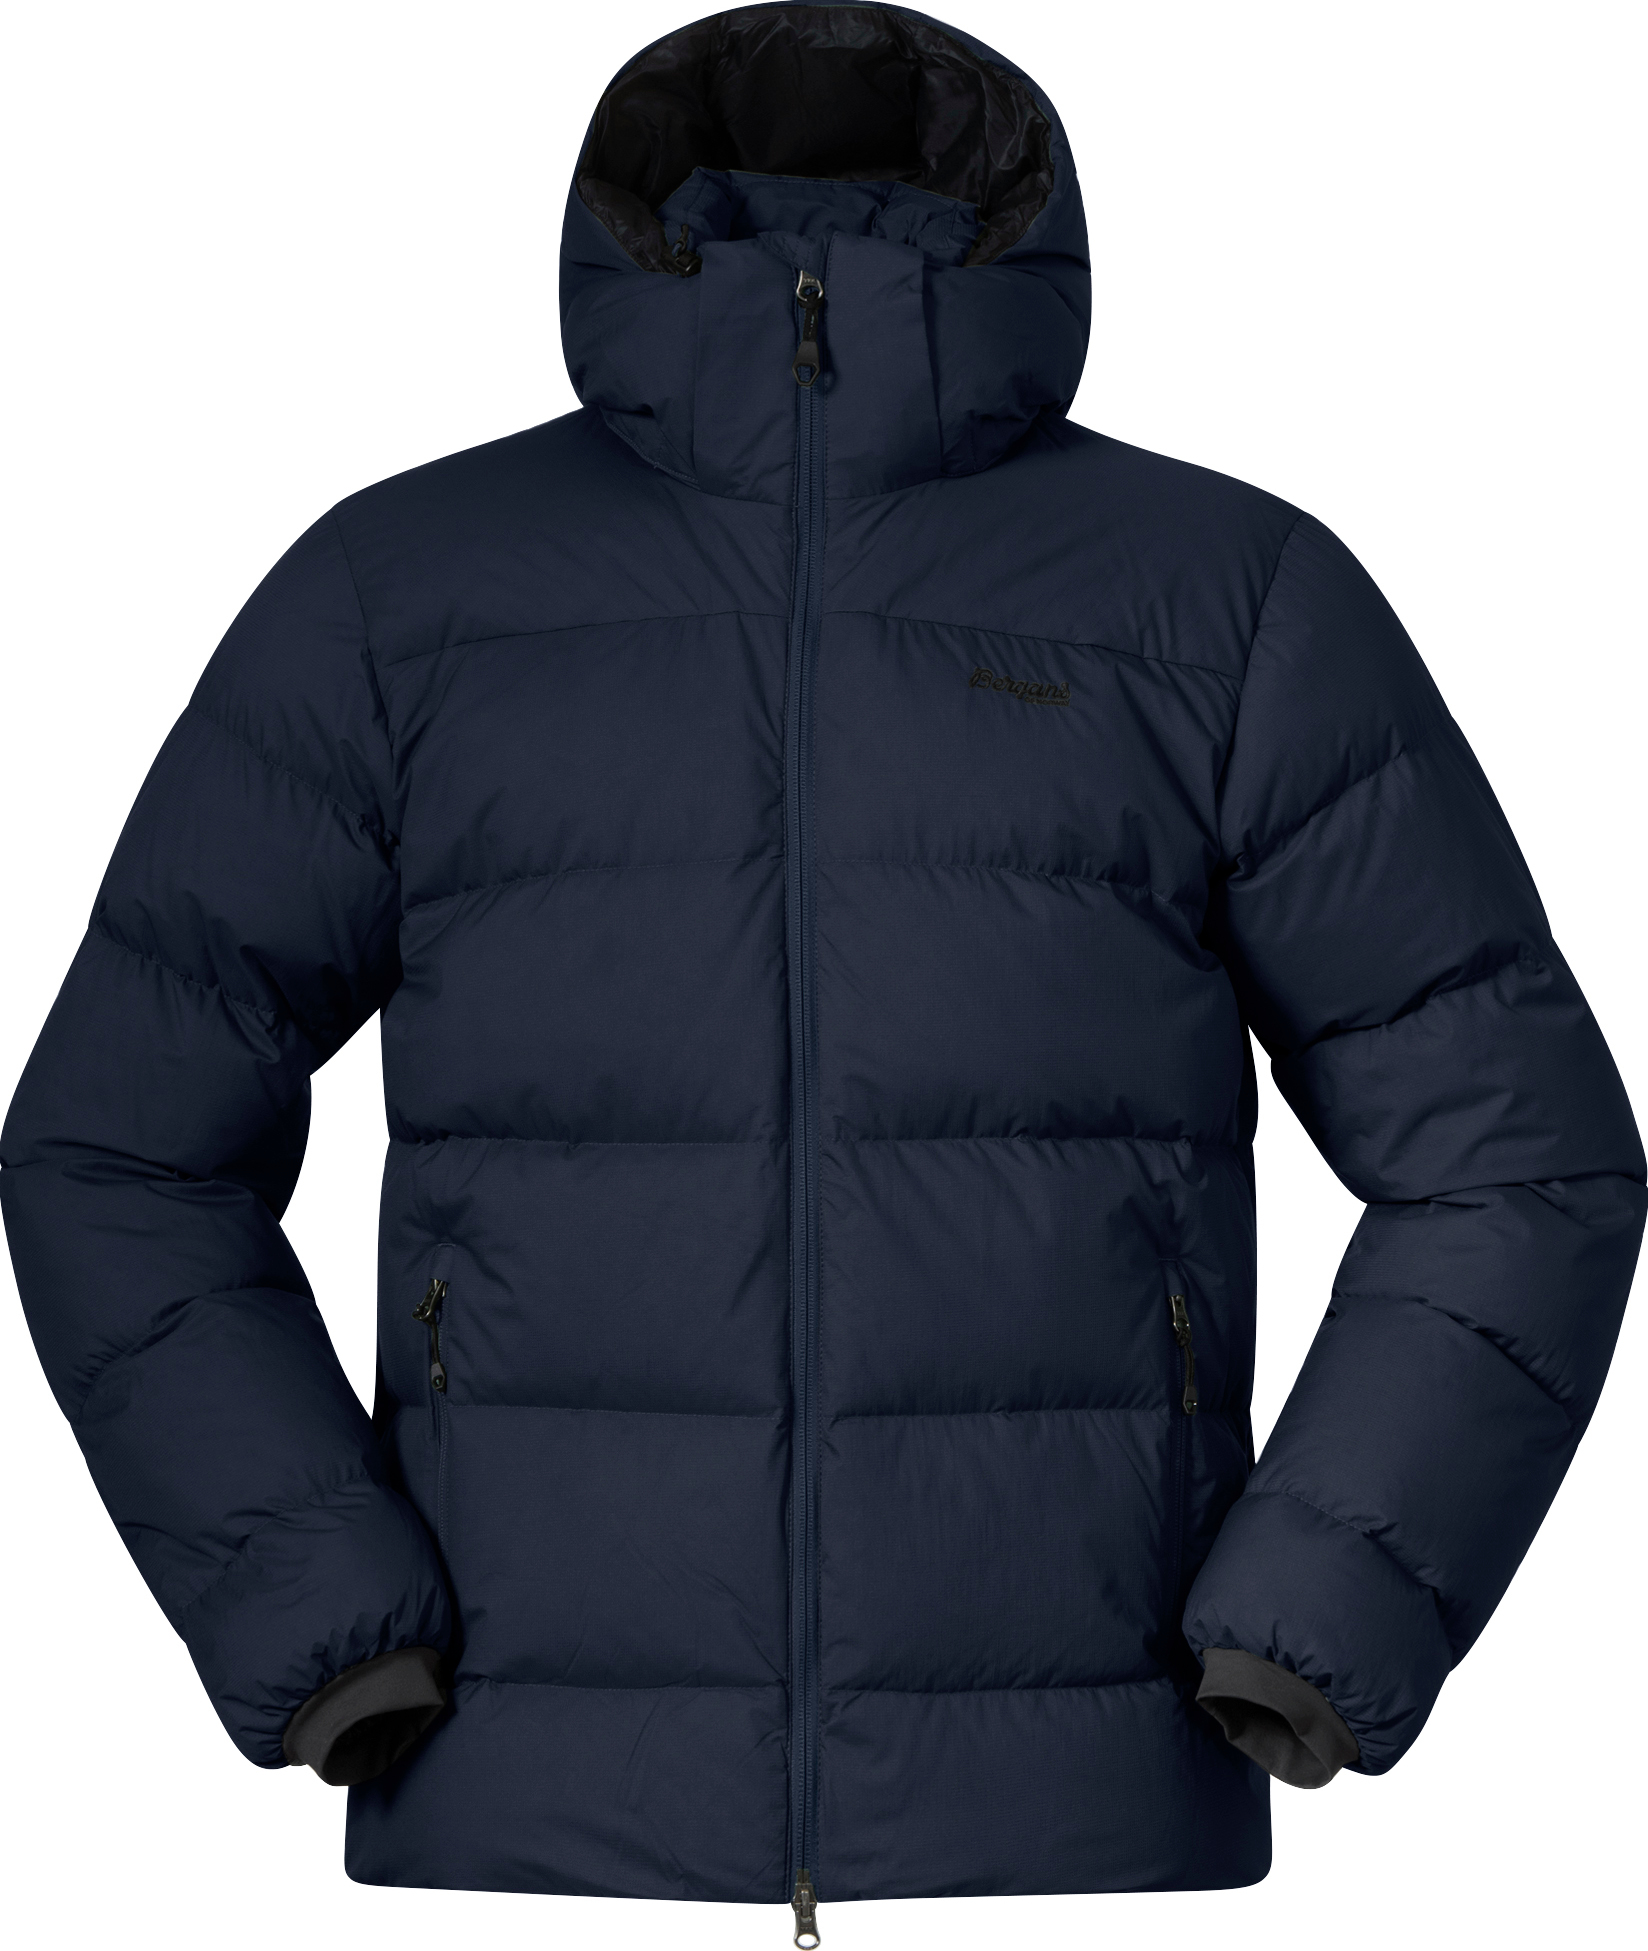 Men's Lava Warm Down Jacket With Hood Navy Blue